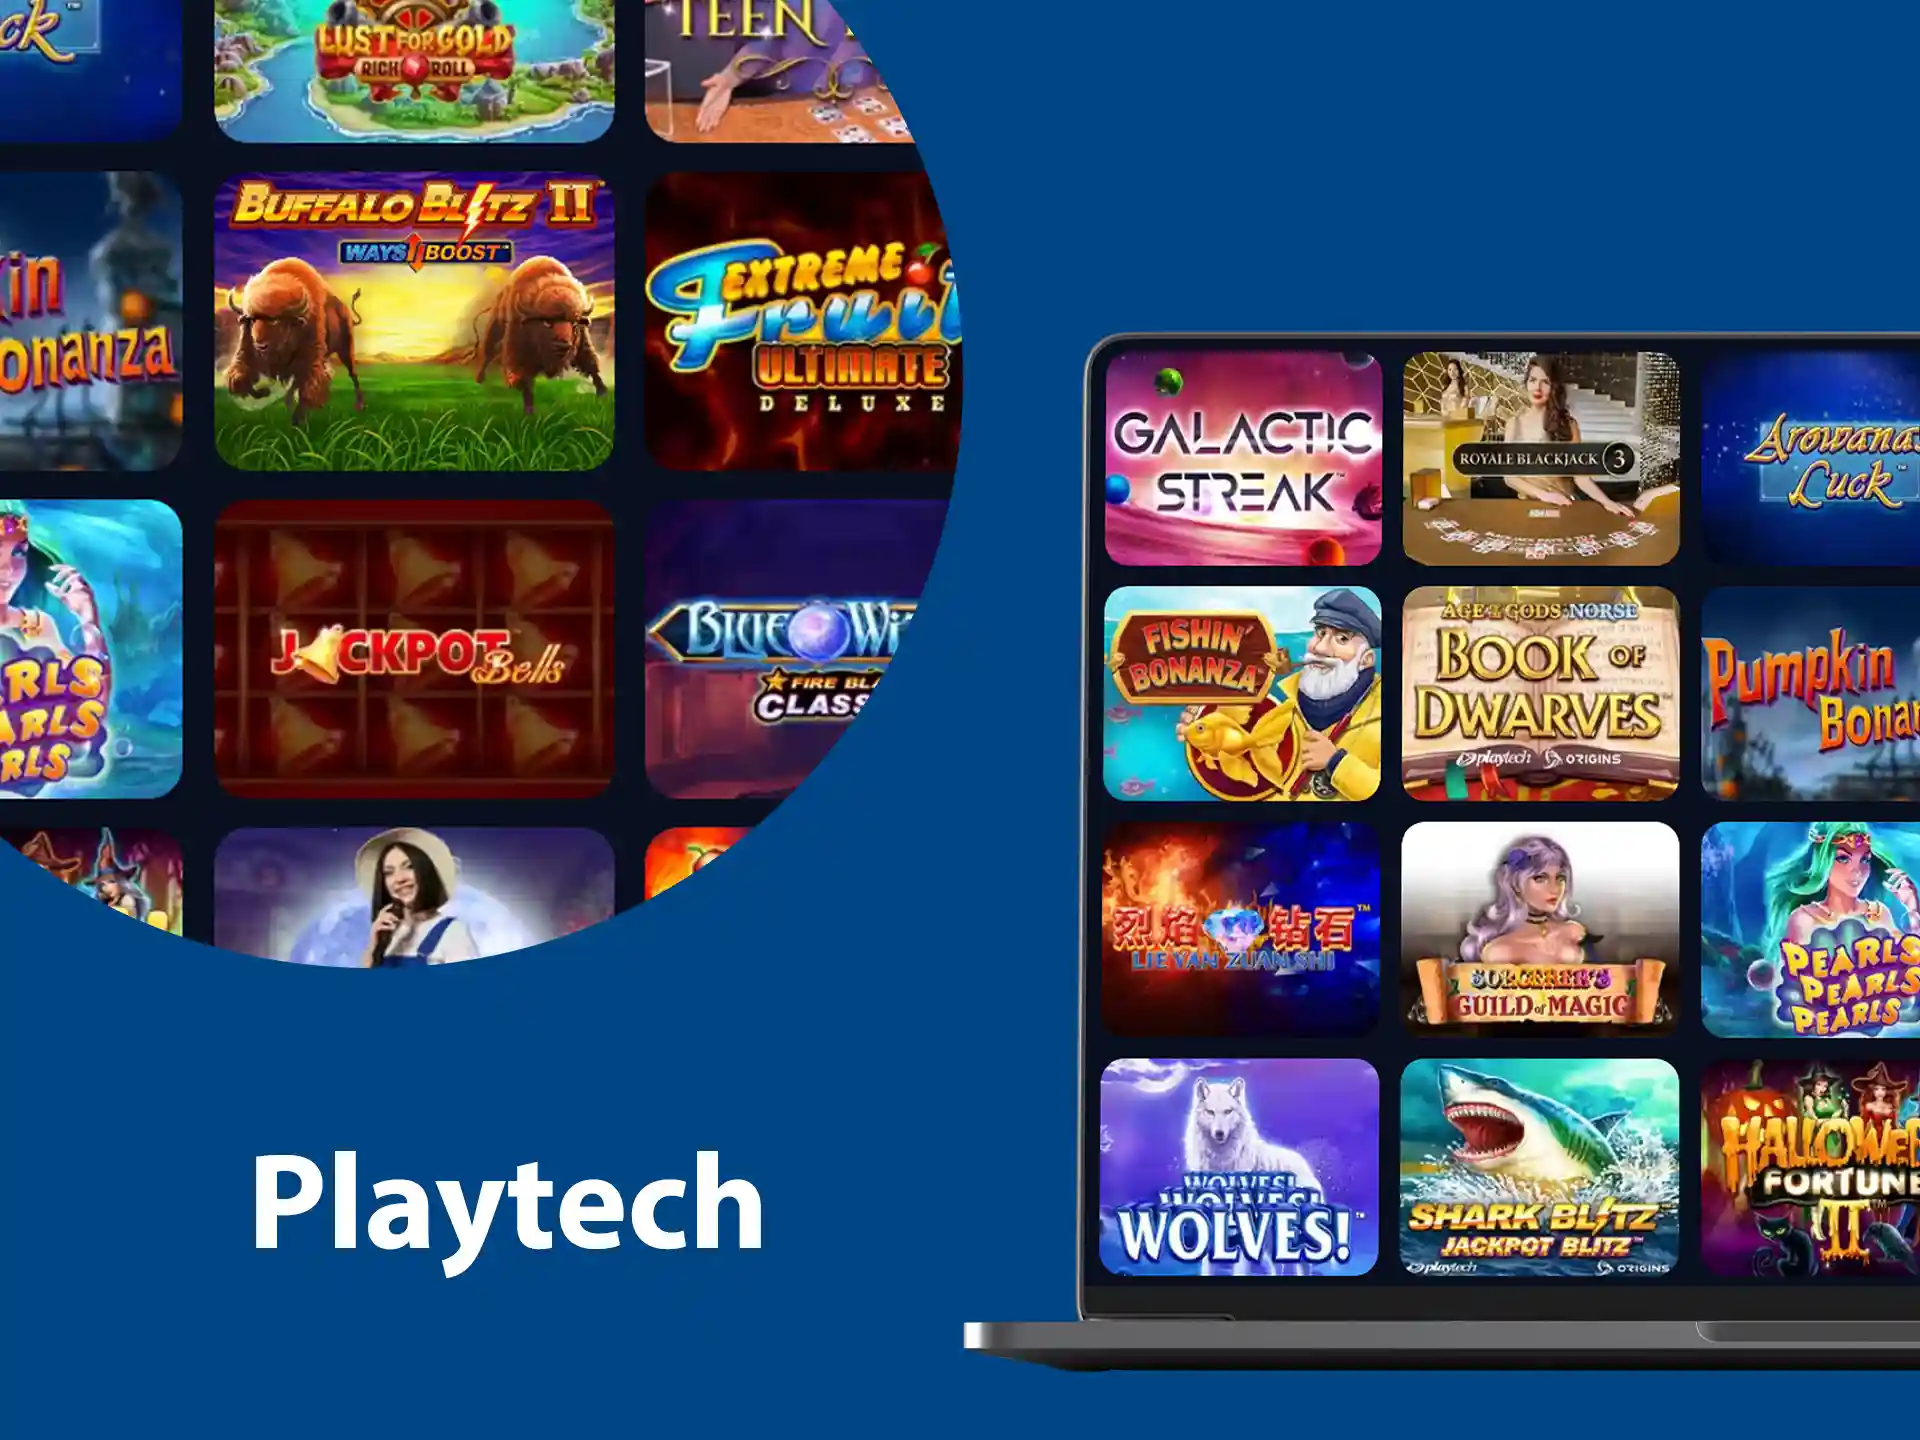 Playtech has built a huge collection of online slots and is one of the most famous gaming software developers.